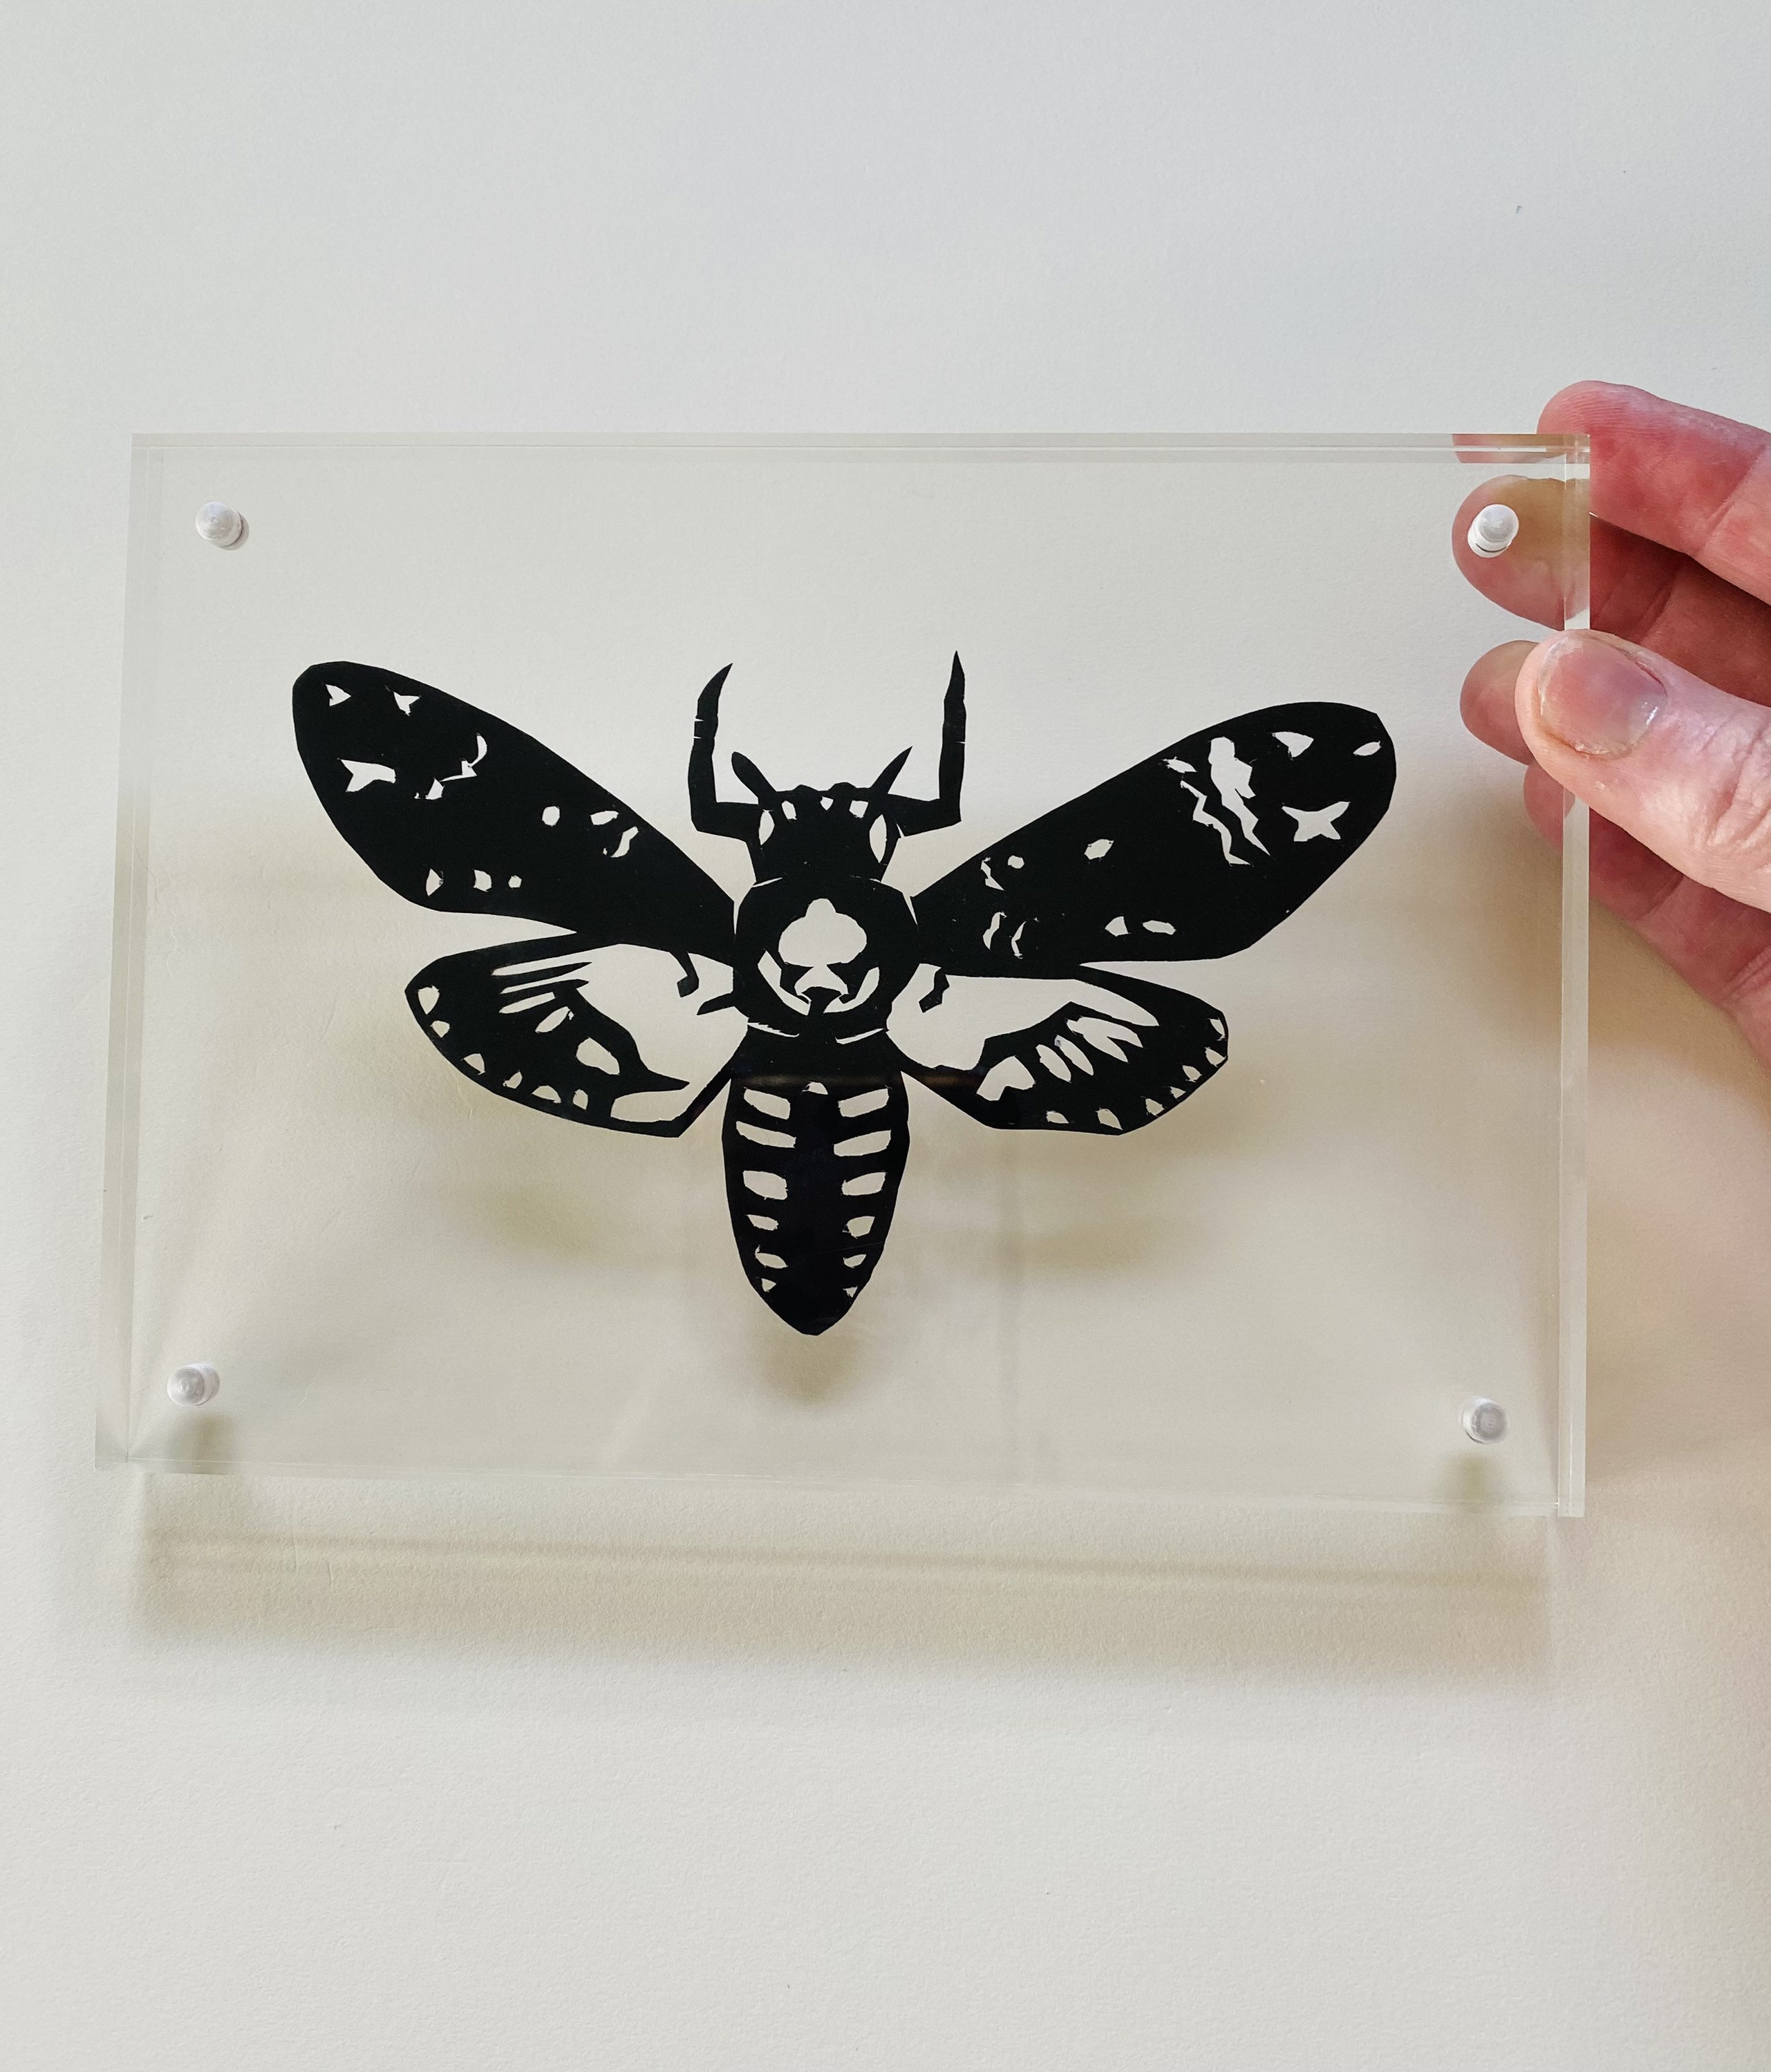 FRAMED Paper Cut Bat Silhouette, Hand Cut With Scissors, Floating in  Plexiglass 5x7 Frame That STANDS ONLY. 